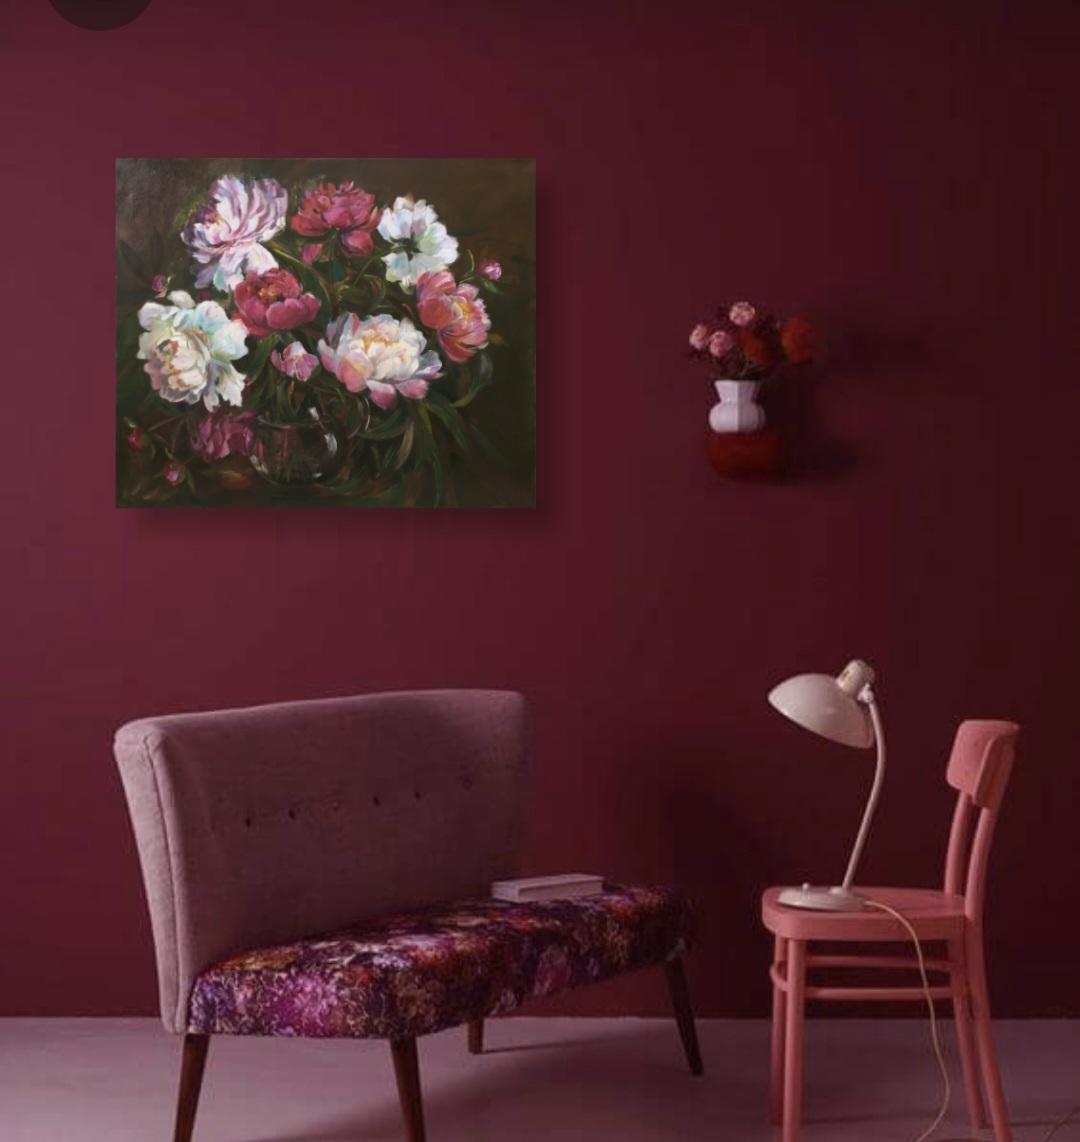 Red and white peonies in the style of Dutch masters - Painting by Lilya Volskaya